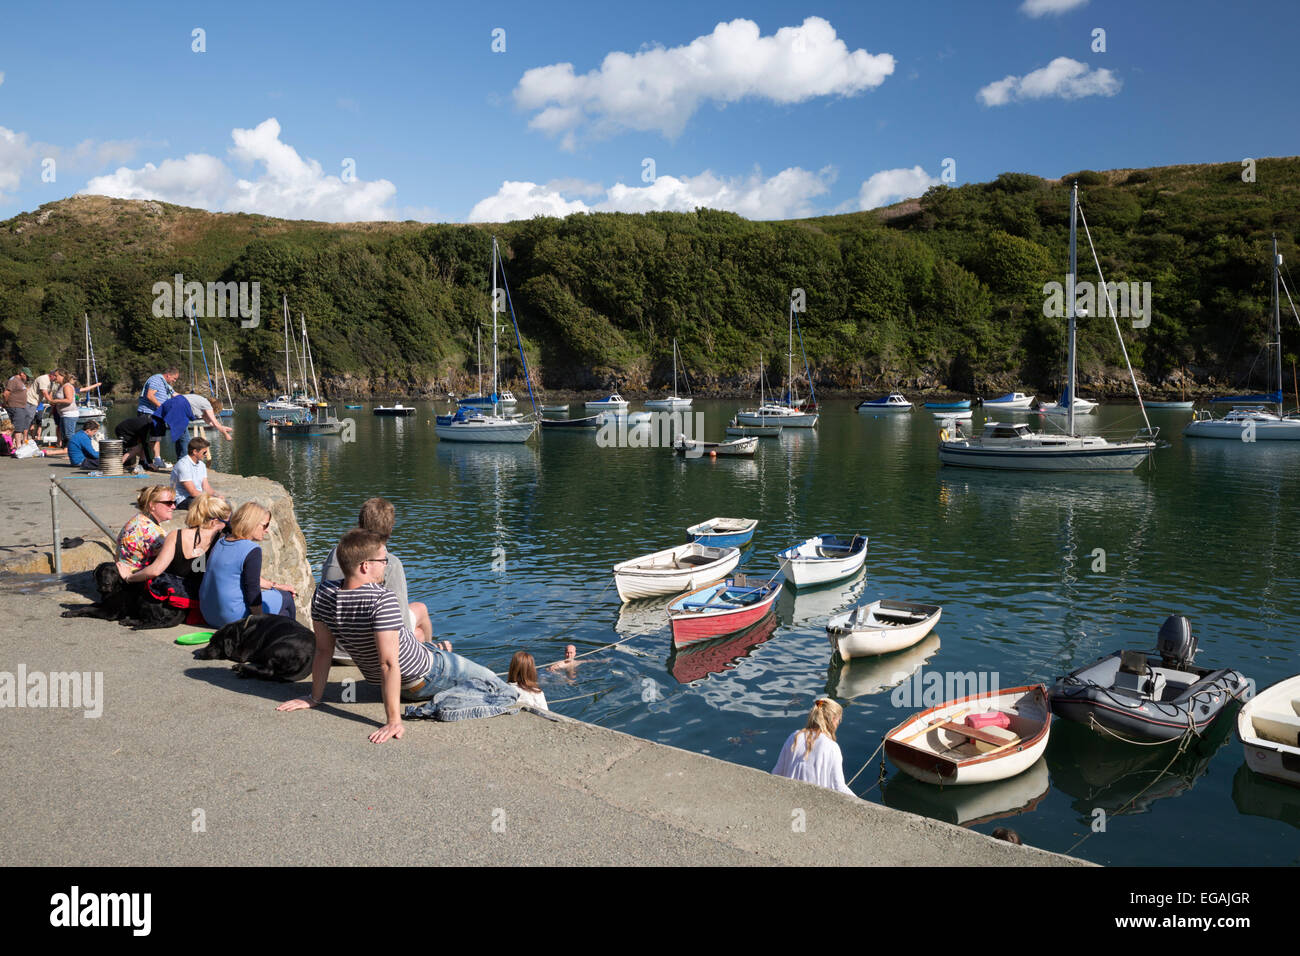 Tourists and boats in harbour, Solva, St Bride's Bay, Pembrokeshire, Wales, United Kingdom, Europe Stock Photo